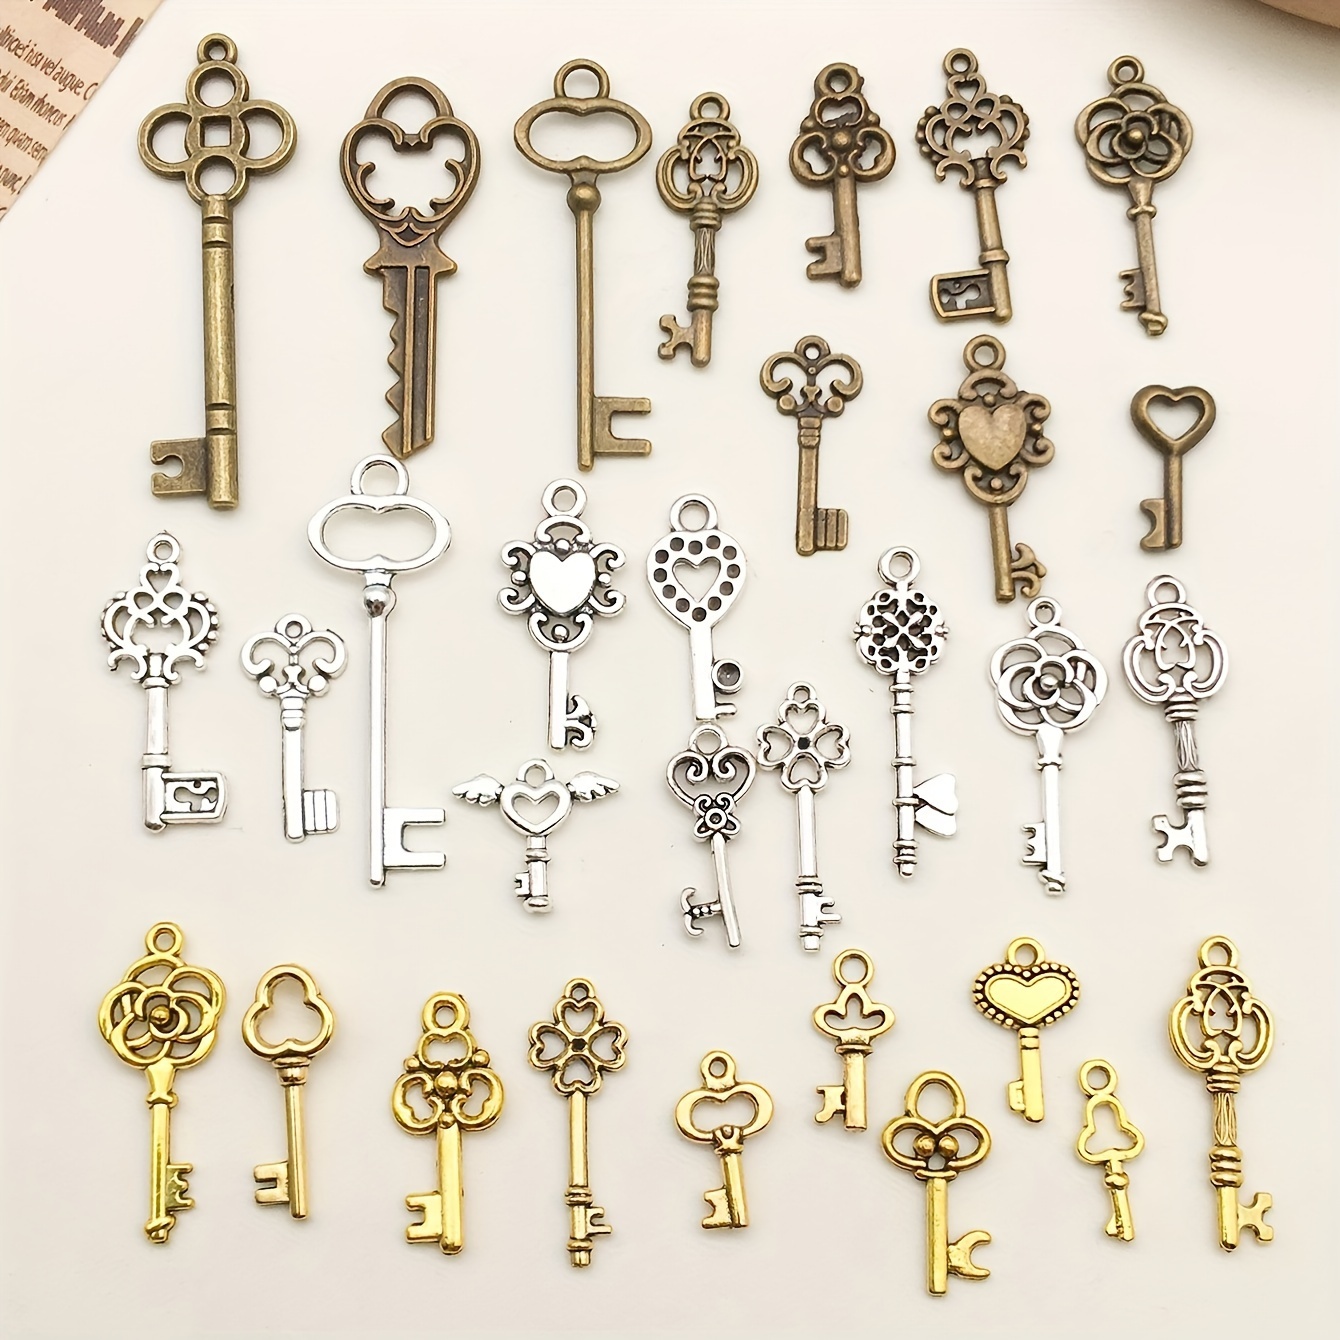 

30 Pcs Vintage Key Charms: A Charming Mix Of Antique Bronze, Silver, And Golden Pendants For Diy Jewelry Making